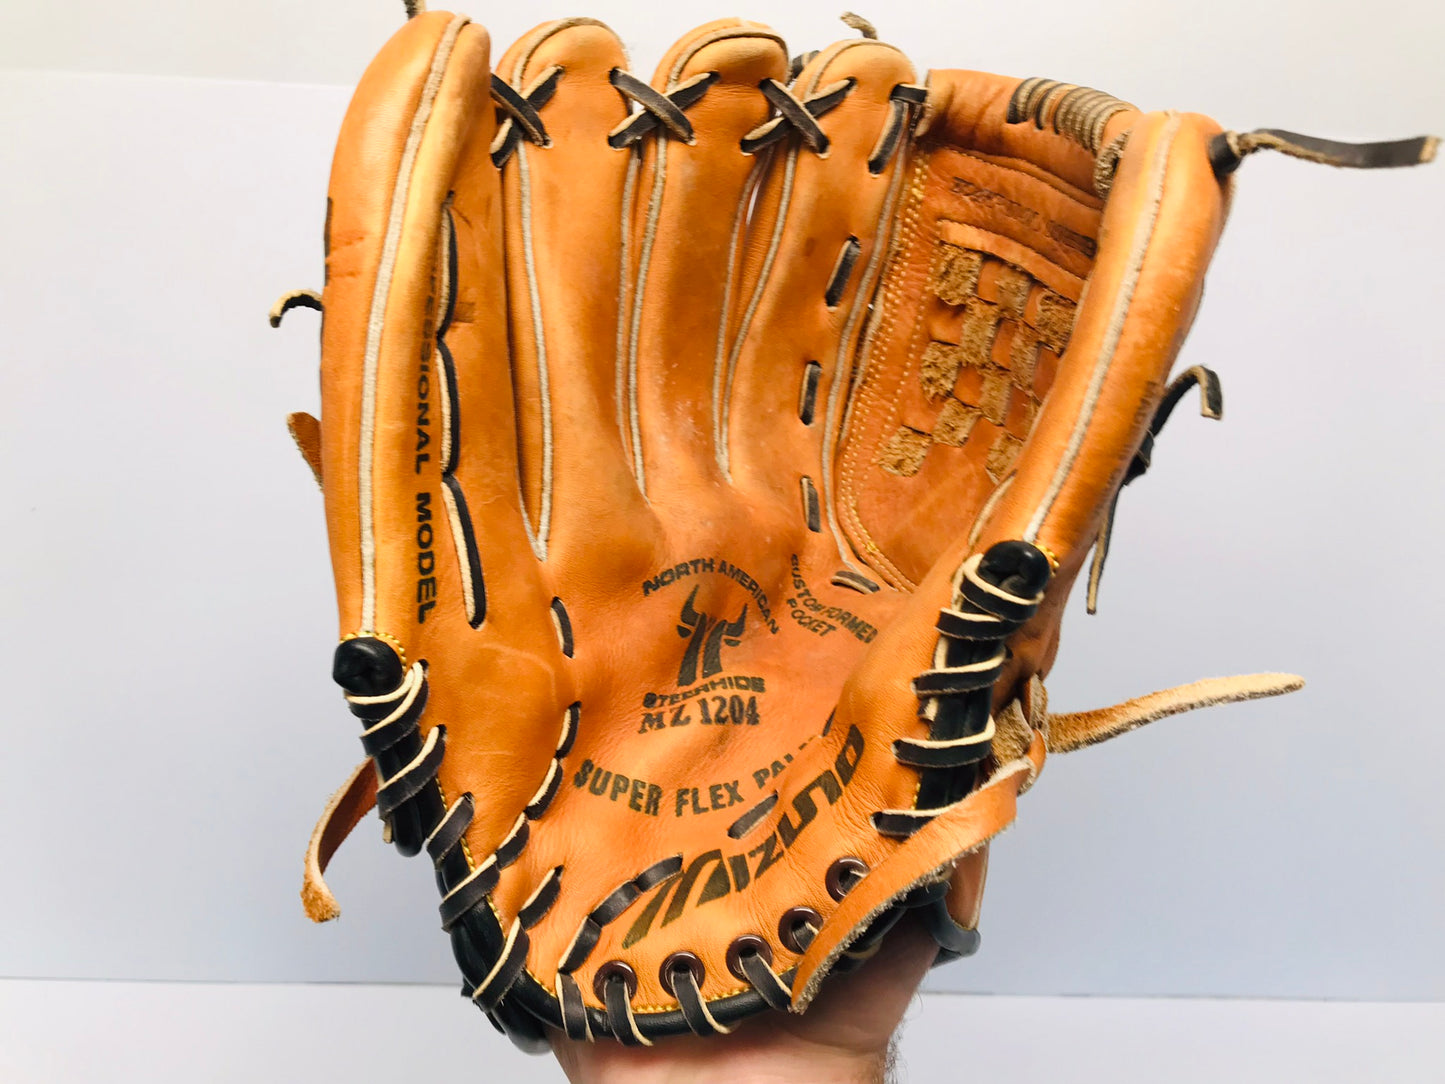 Baseball Glove Adult Size 12 inch Mizuno Leather Well Made Fits RIGHT Hand